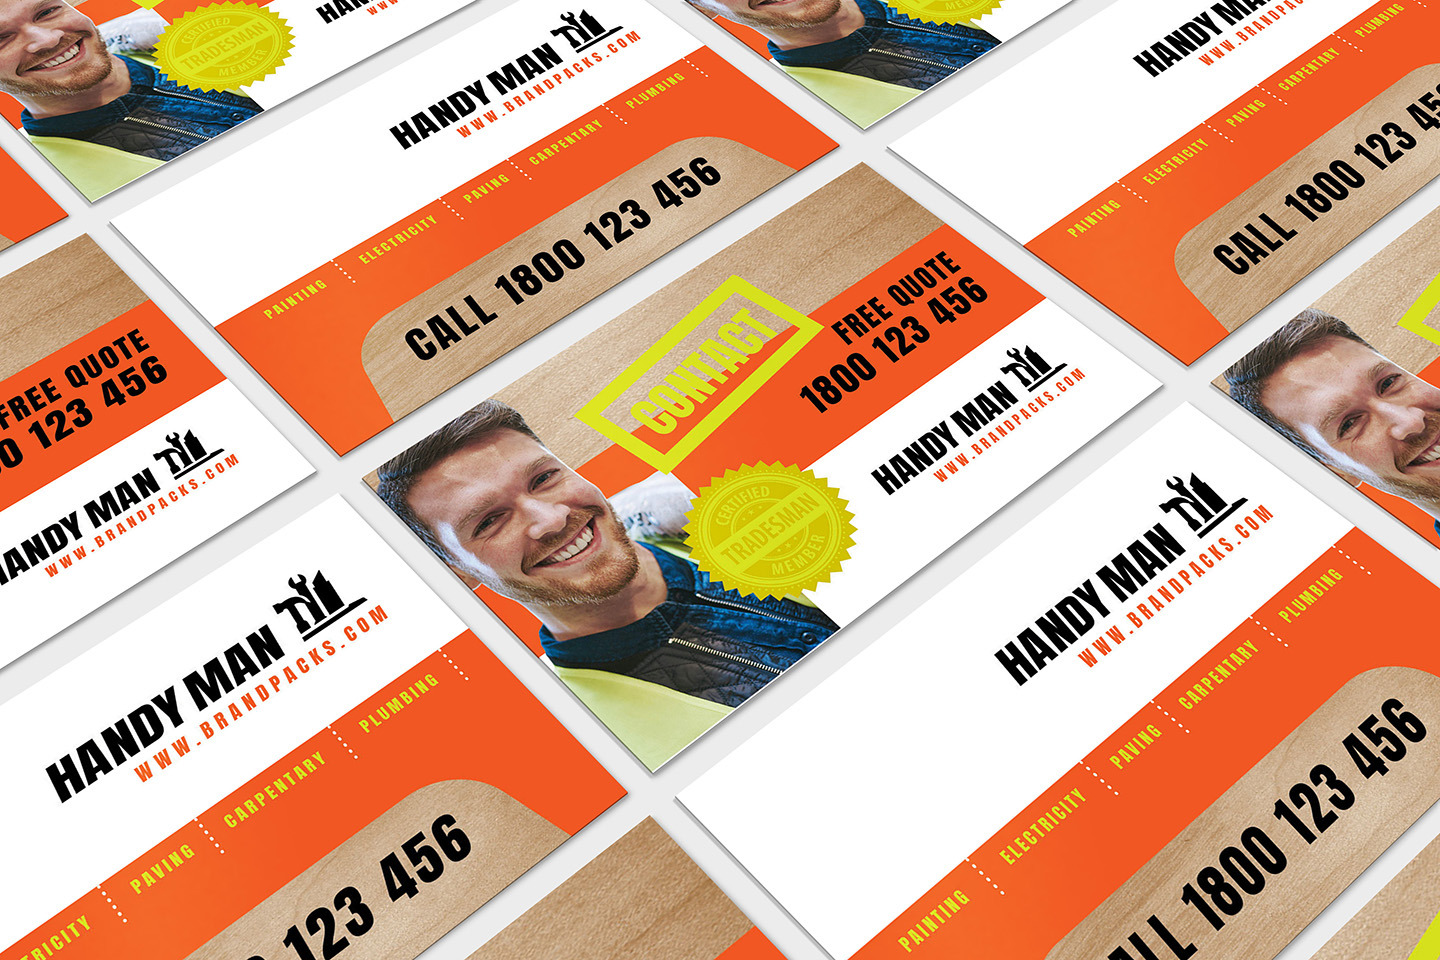 Handyman Business Card Template from cmkt-image-prd.freetls.fastly.net